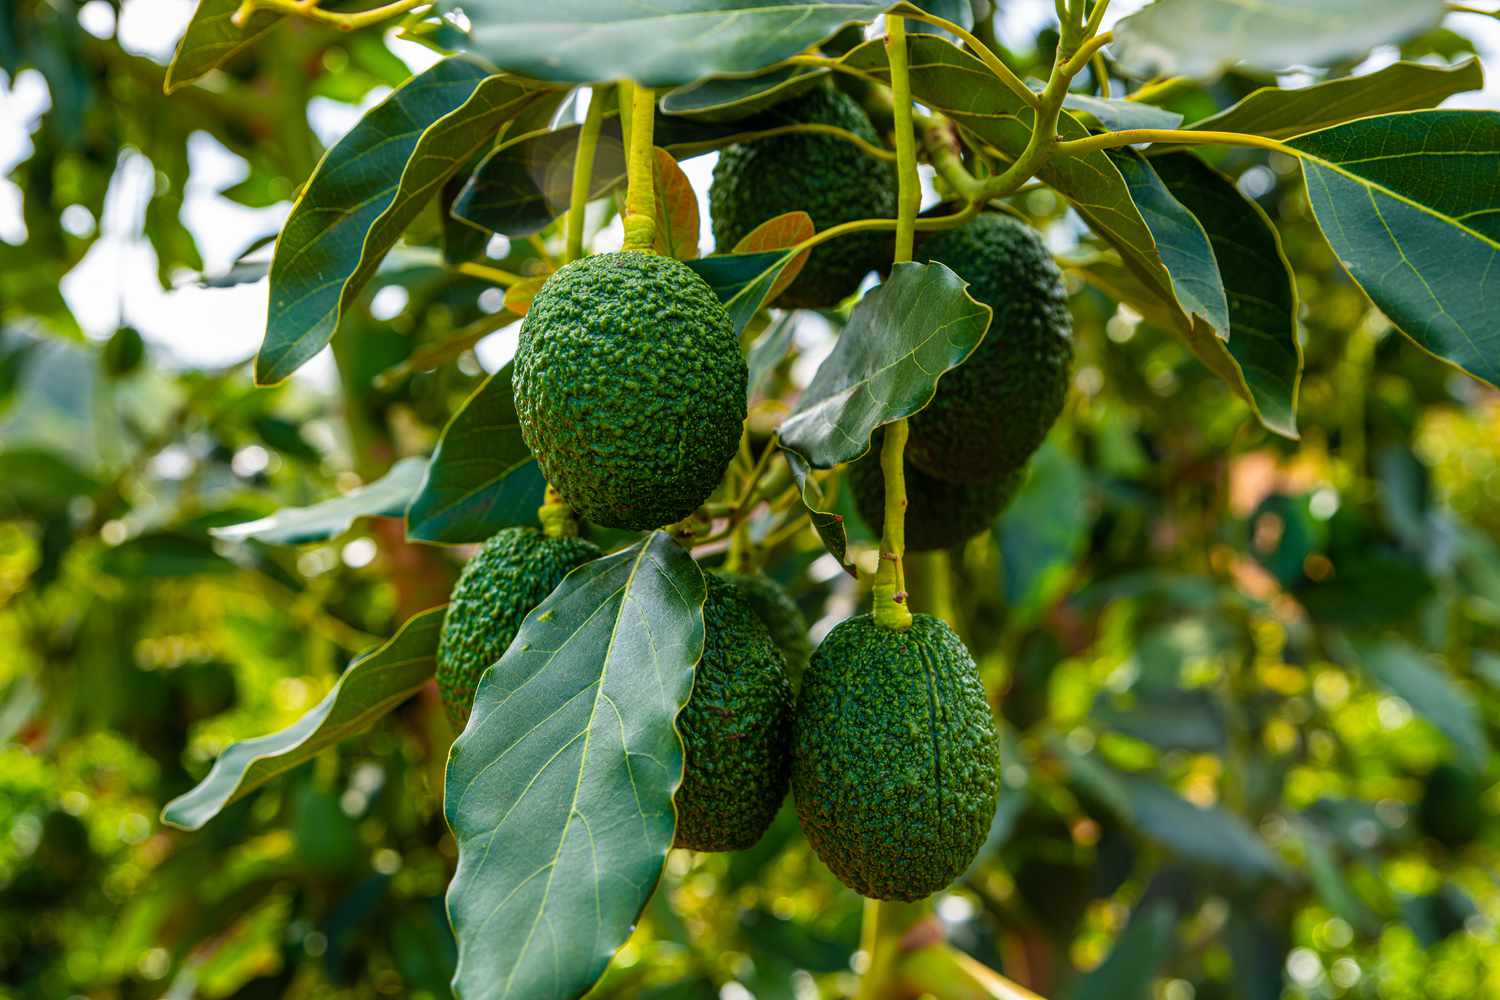 From Kenya to Global Markets: How Royal Seedlings is Making a Mark in the Avocado Industry